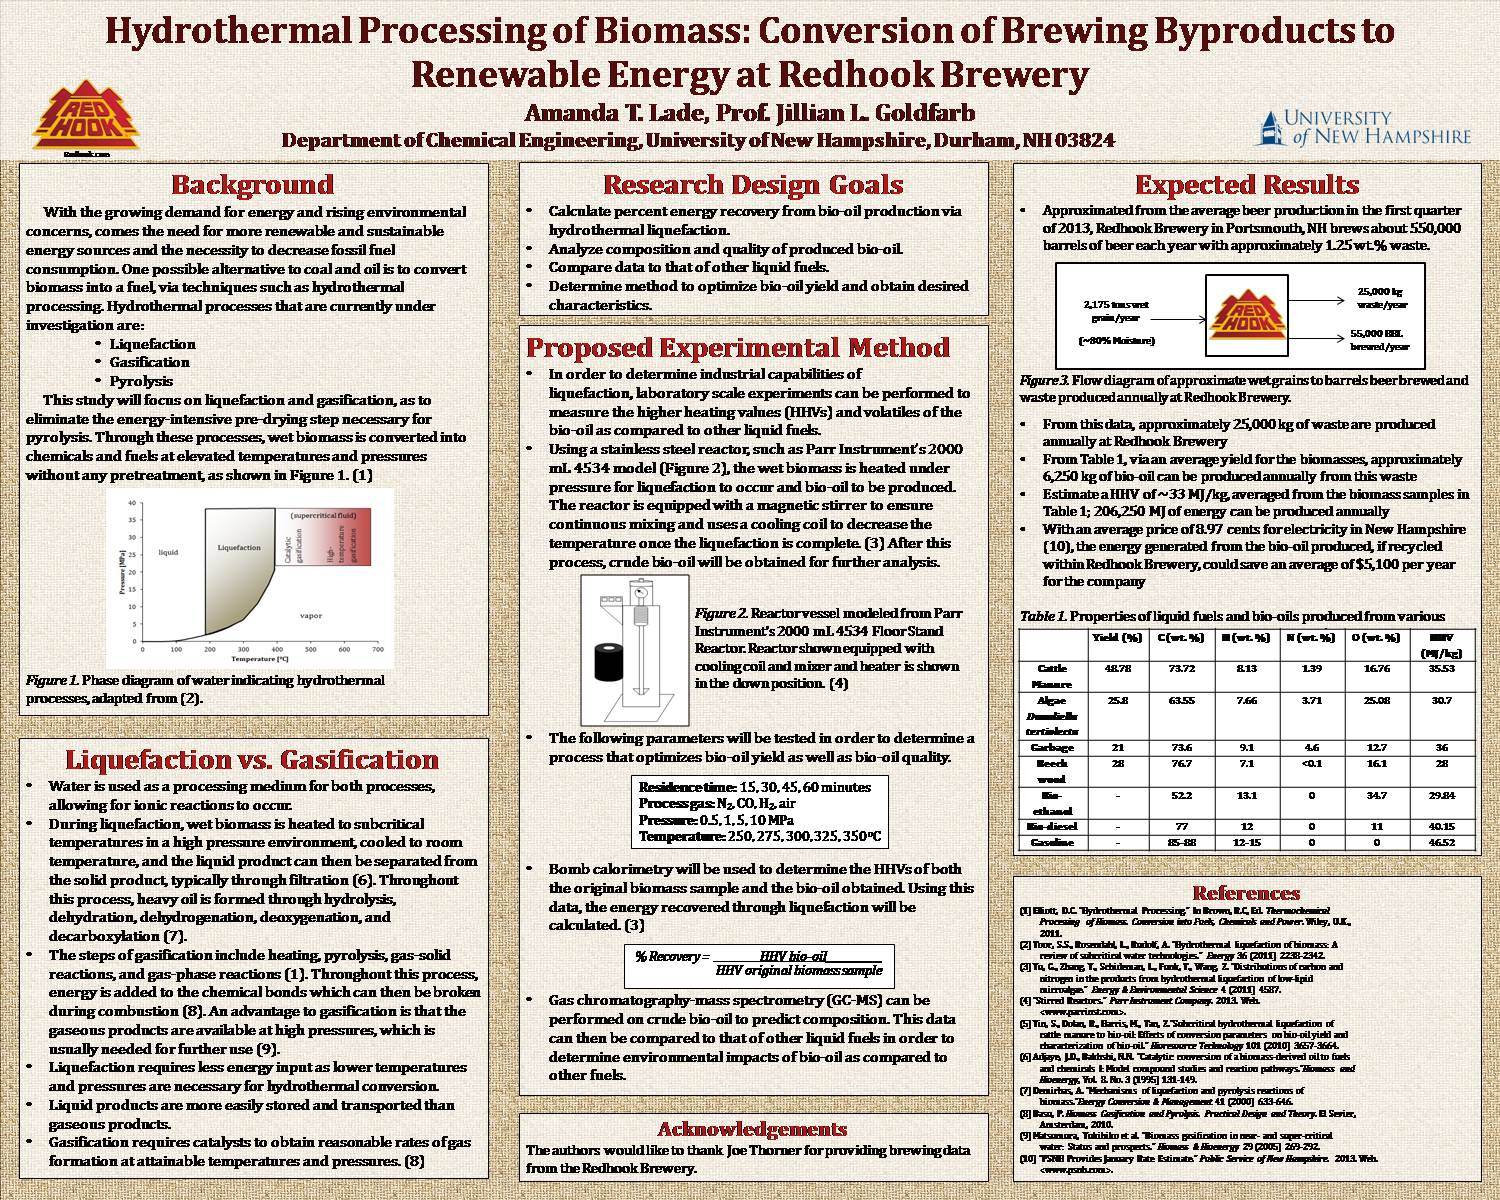 Hydrothermal Processing Of Biomass:  Conversion Of Brewing Byproducts To  Renewable Energy At Redhook Brewery by ats35